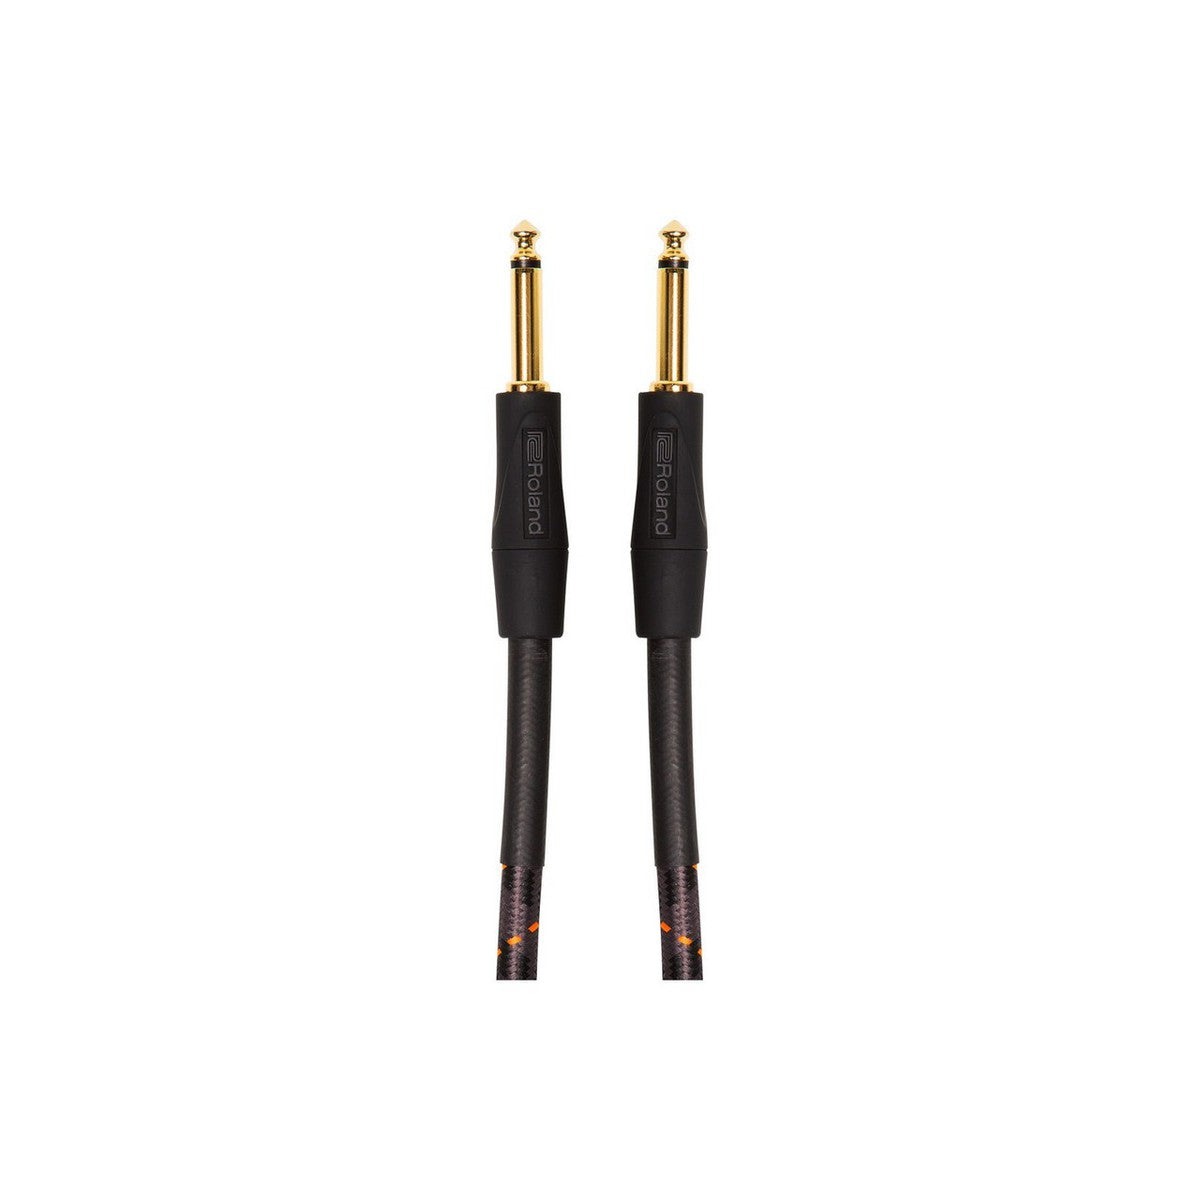 Roland Gold Series 1/4"" Straight/Straight Instrument Cable 5ft Black